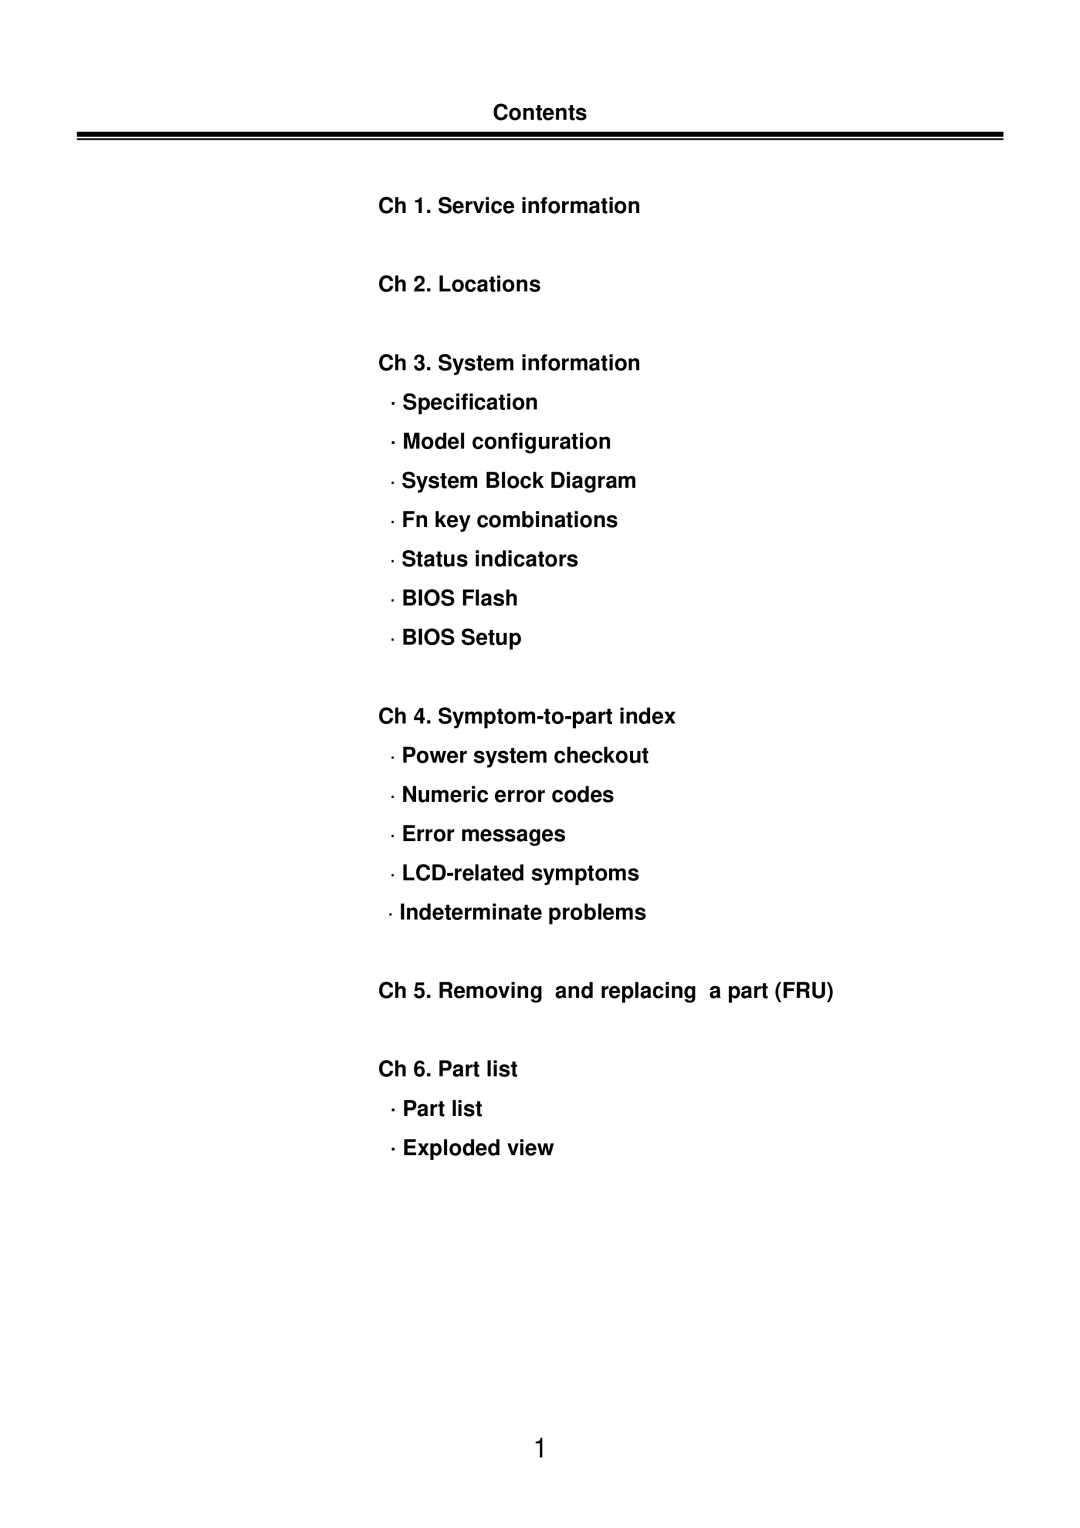 LG Electronics LM50 service manual Contents, Ch 1. Service information Ch 2. Locations Ch 3. System information 